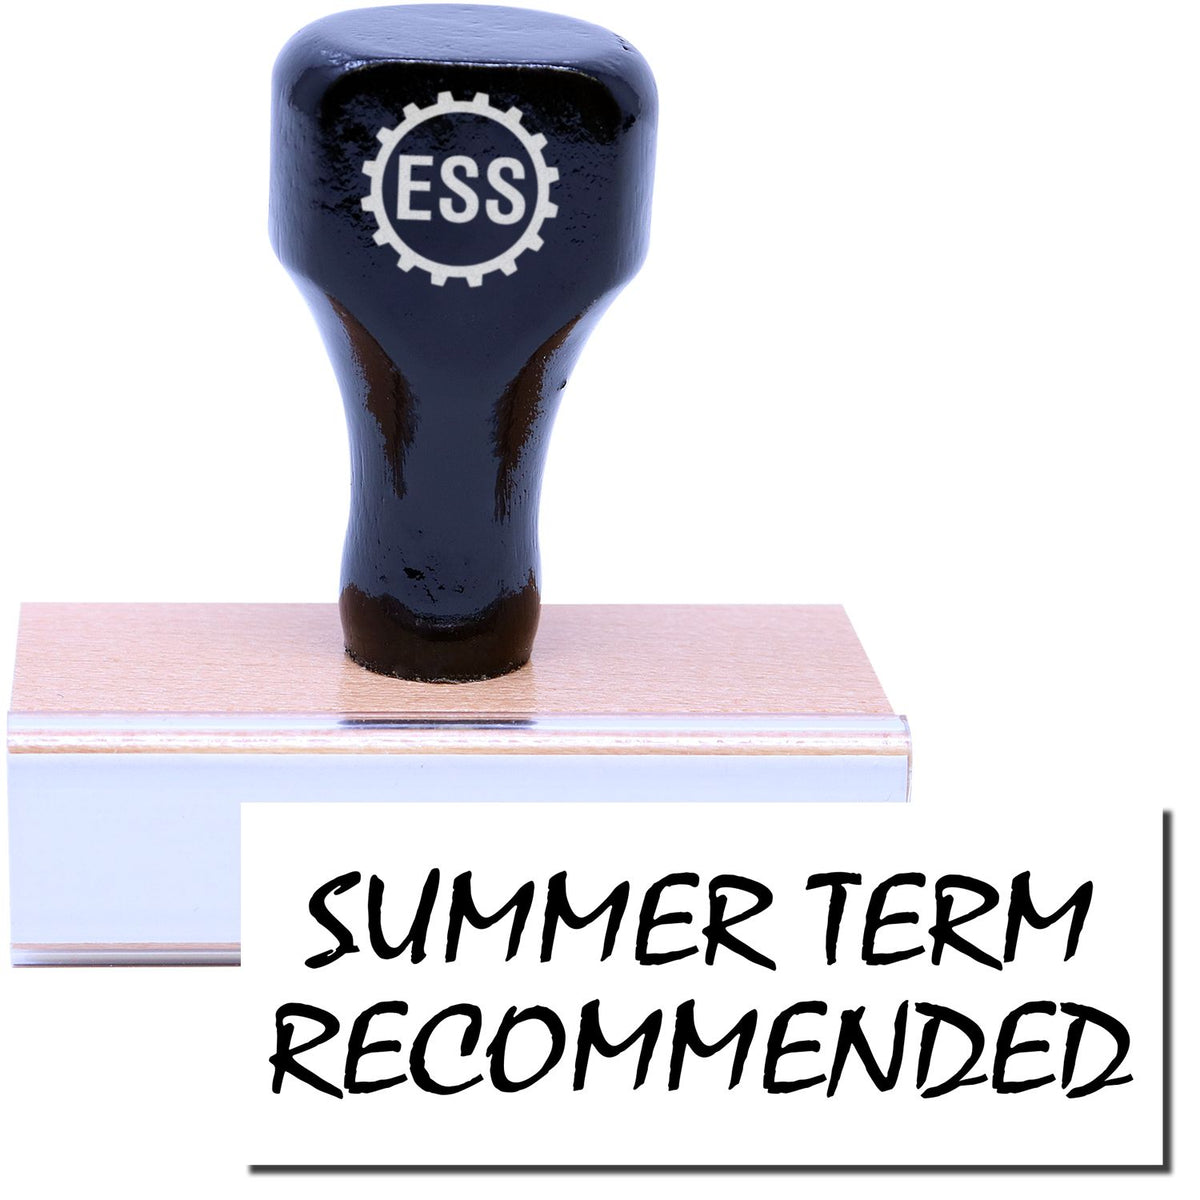 A stock office rubber stamp with a stamped image showing how the text &quot;SUMMER TERM RECOMMENDED&quot; in a large font is displayed after stamping.